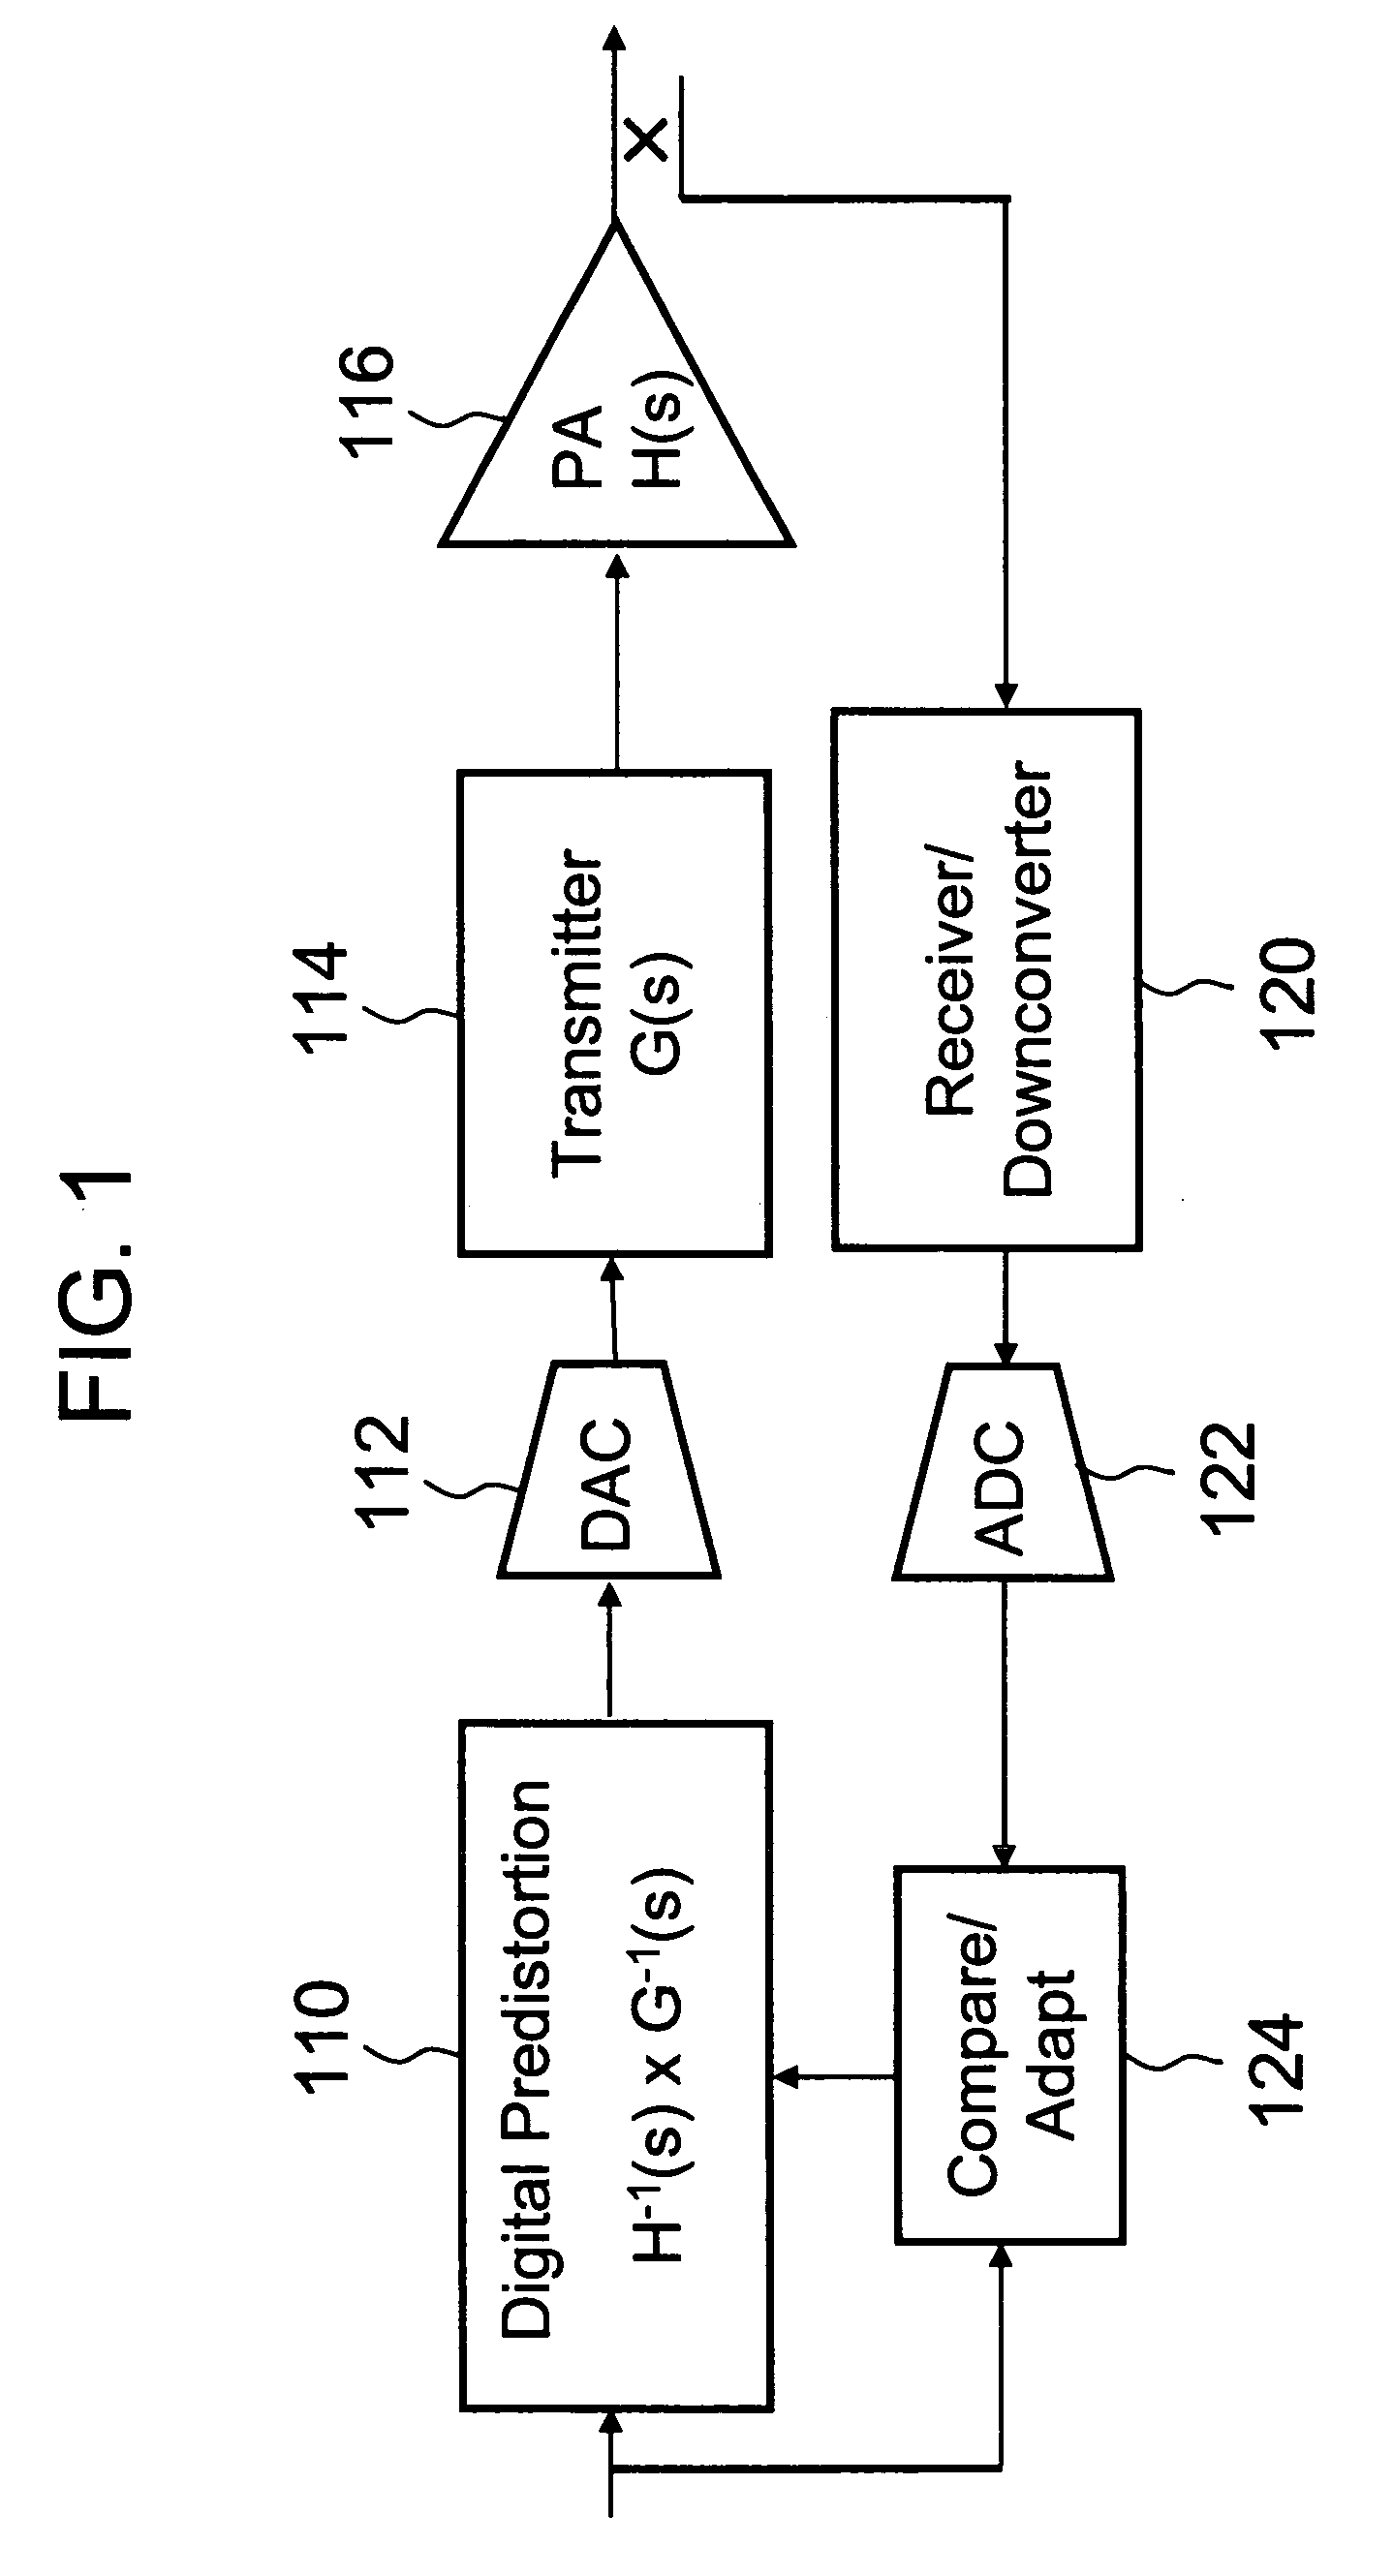 Method of power amplifier predistortion adaptation using compression detection